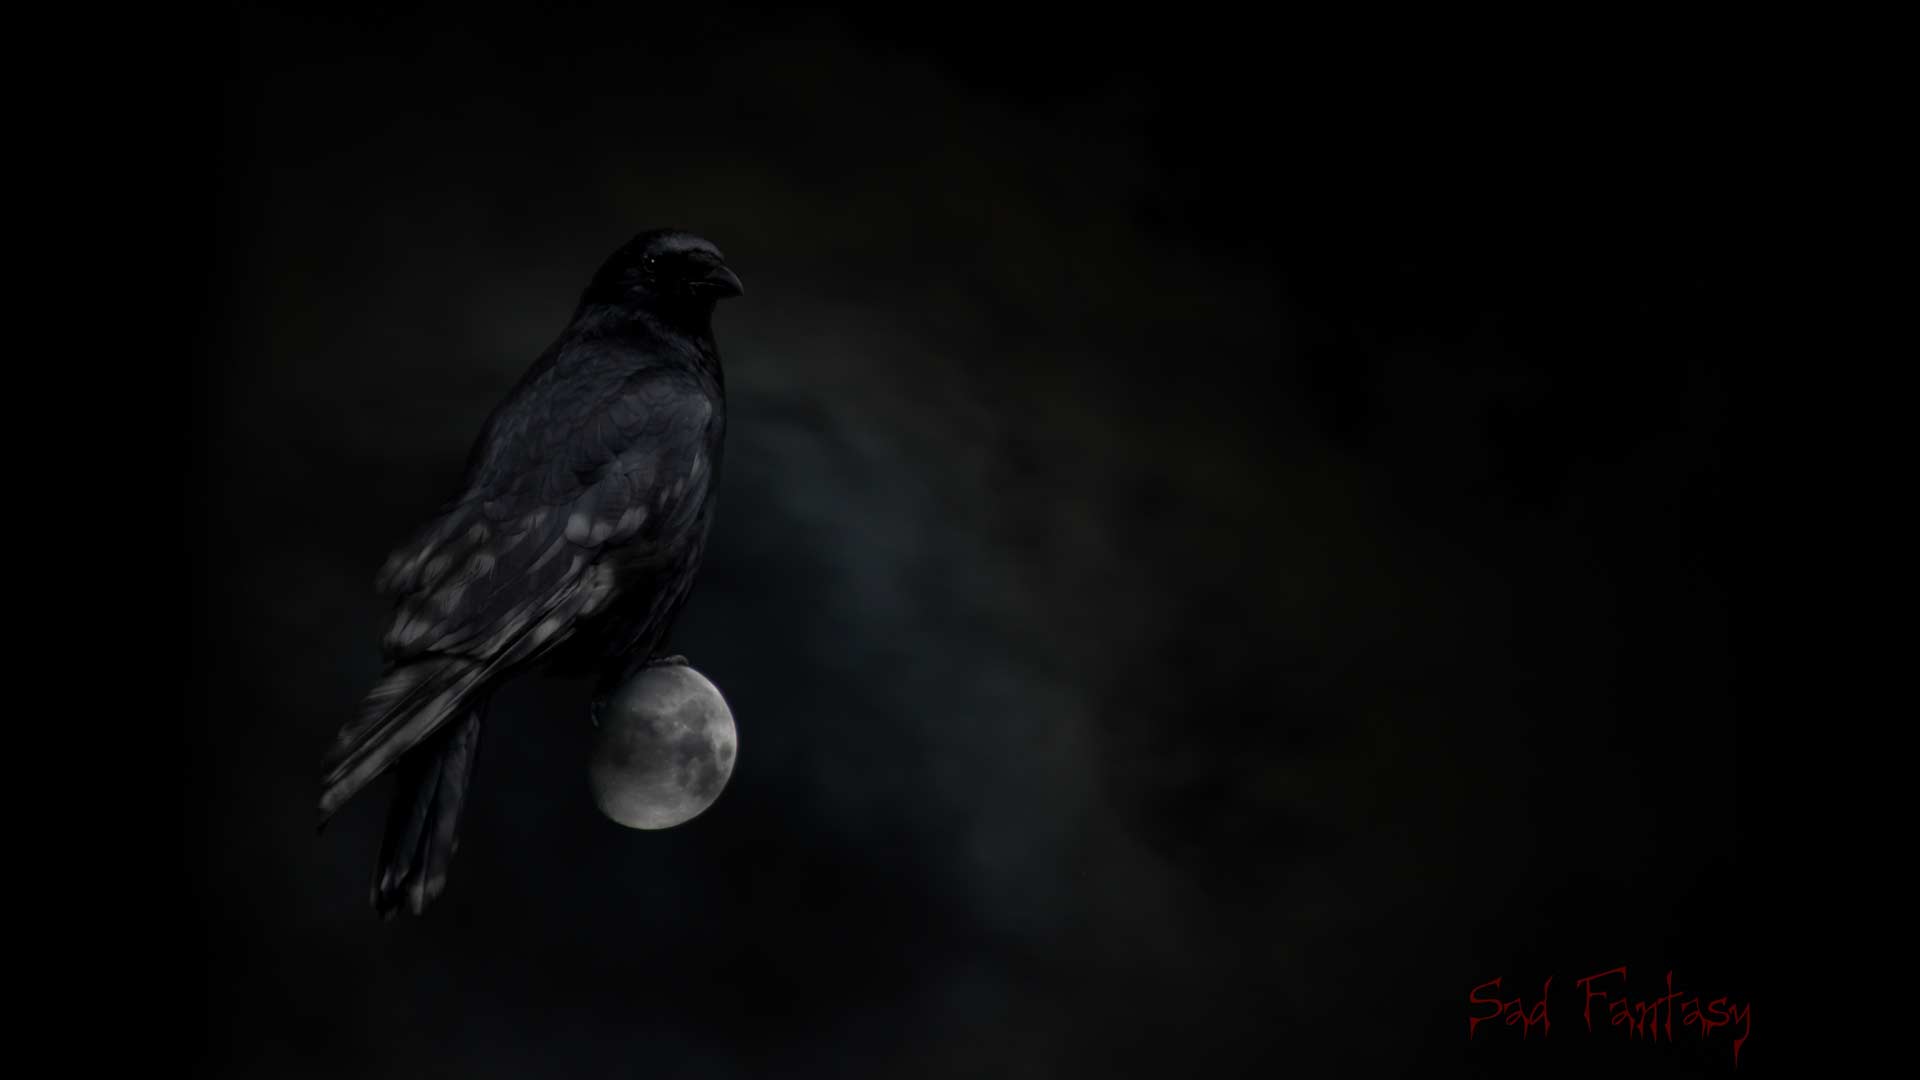 crow/raven on the moon by Sad Fantasy